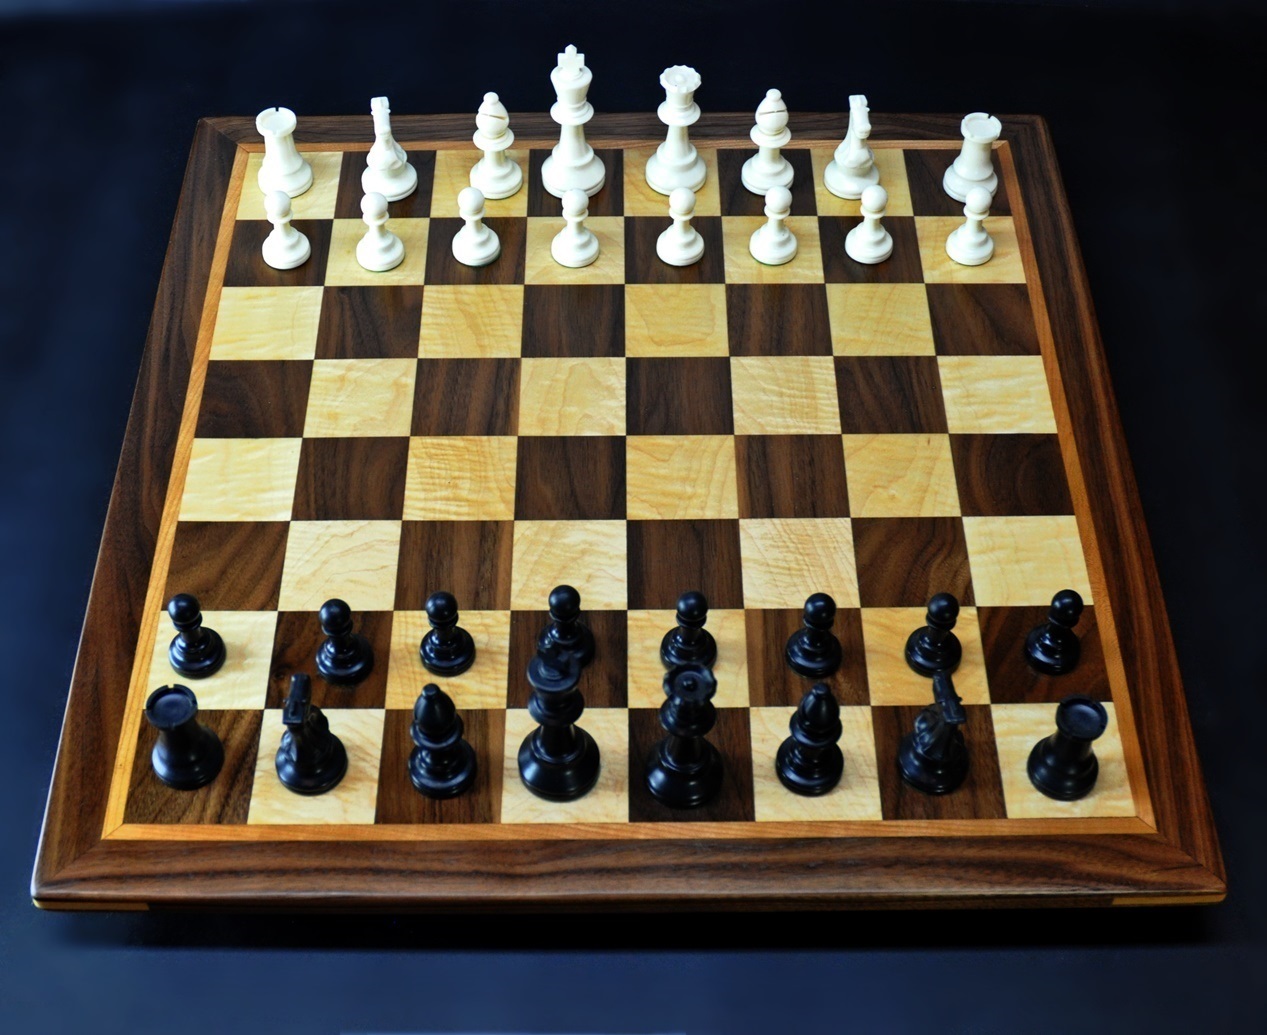 Sweet Hill Wood Chess Boards. Walnut and Maple Chess Board with Cherry Wood Border 2 inch squares